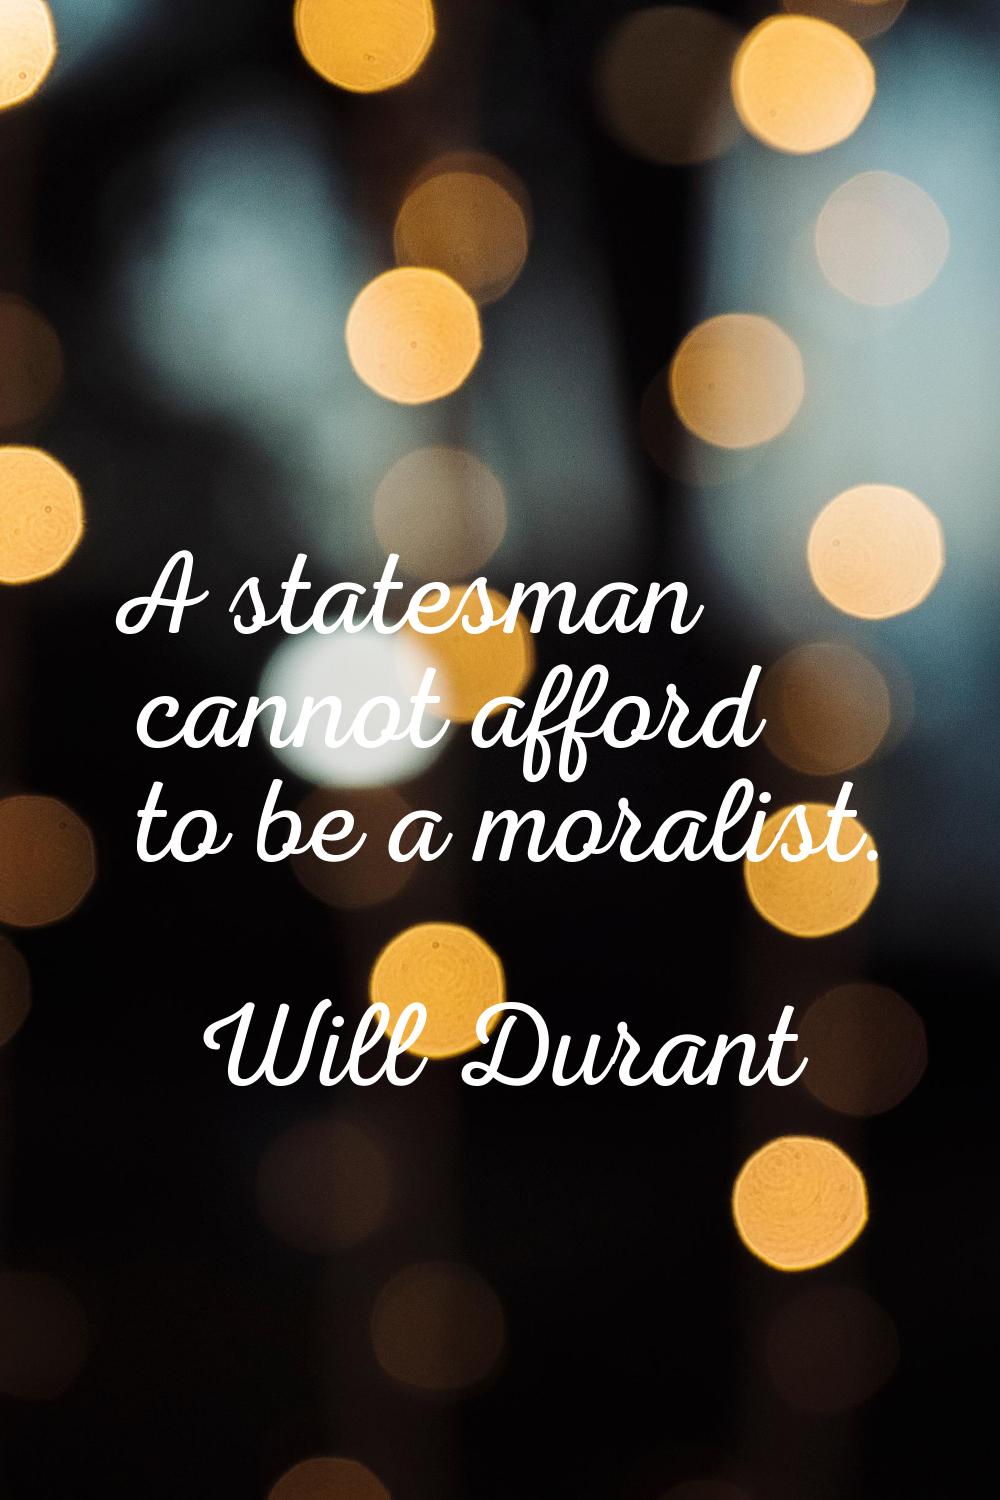 A statesman cannot afford to be a moralist.